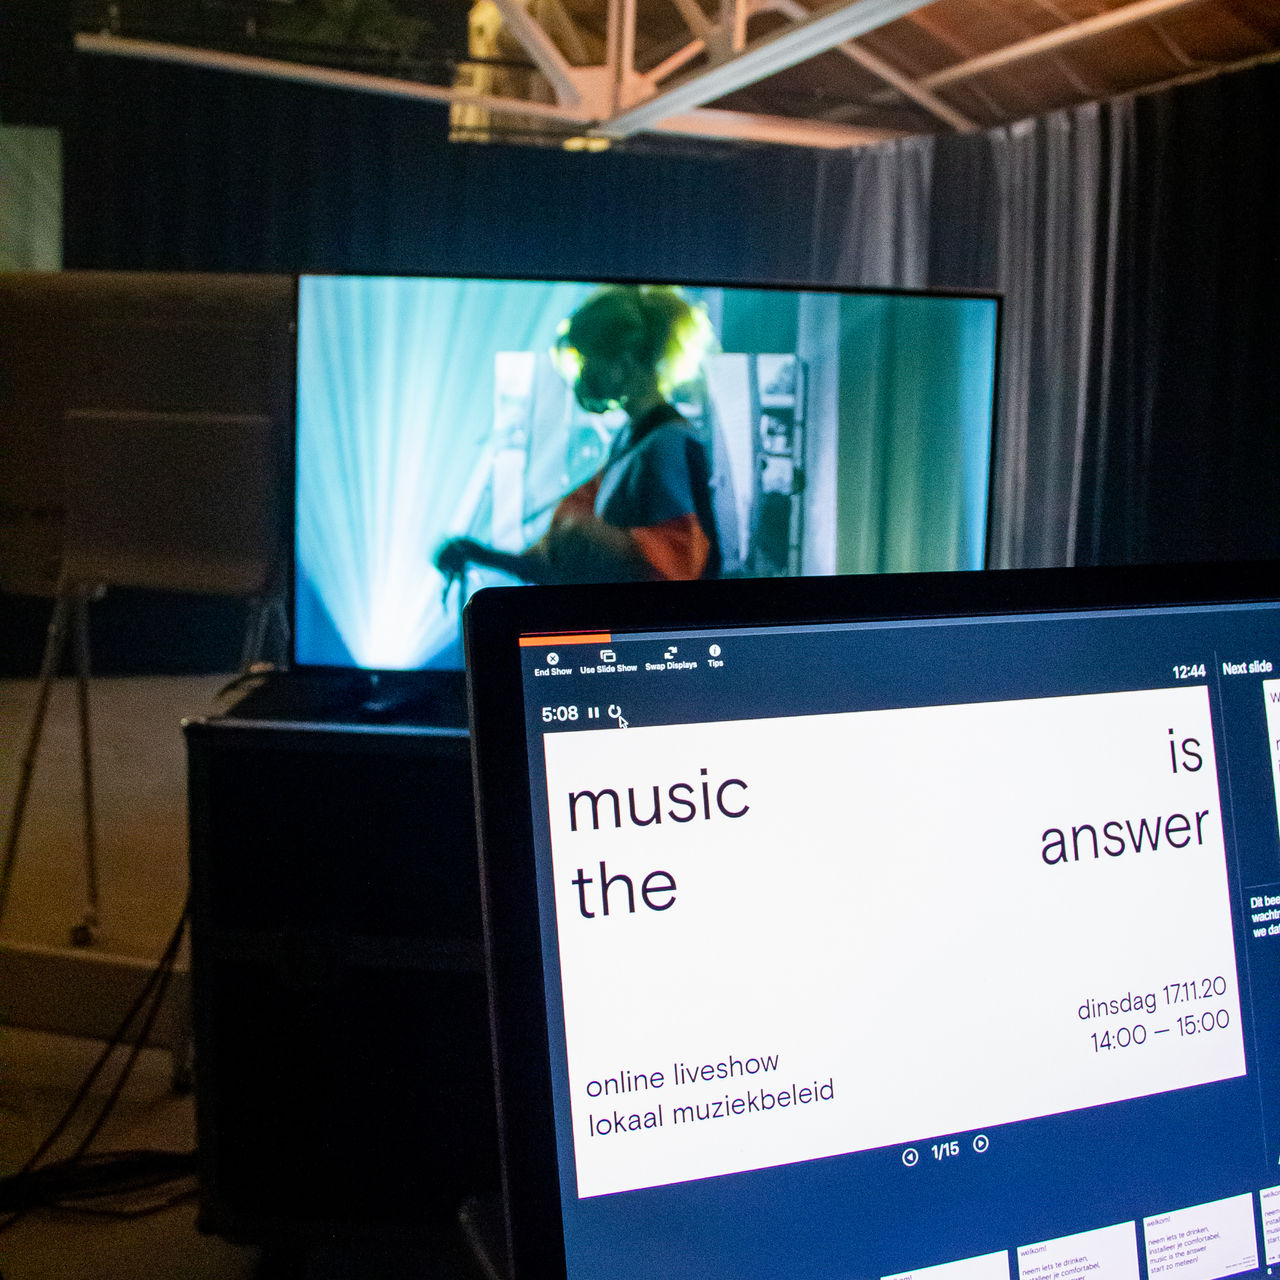 behind the scenes @ launch ‘music is the answer’